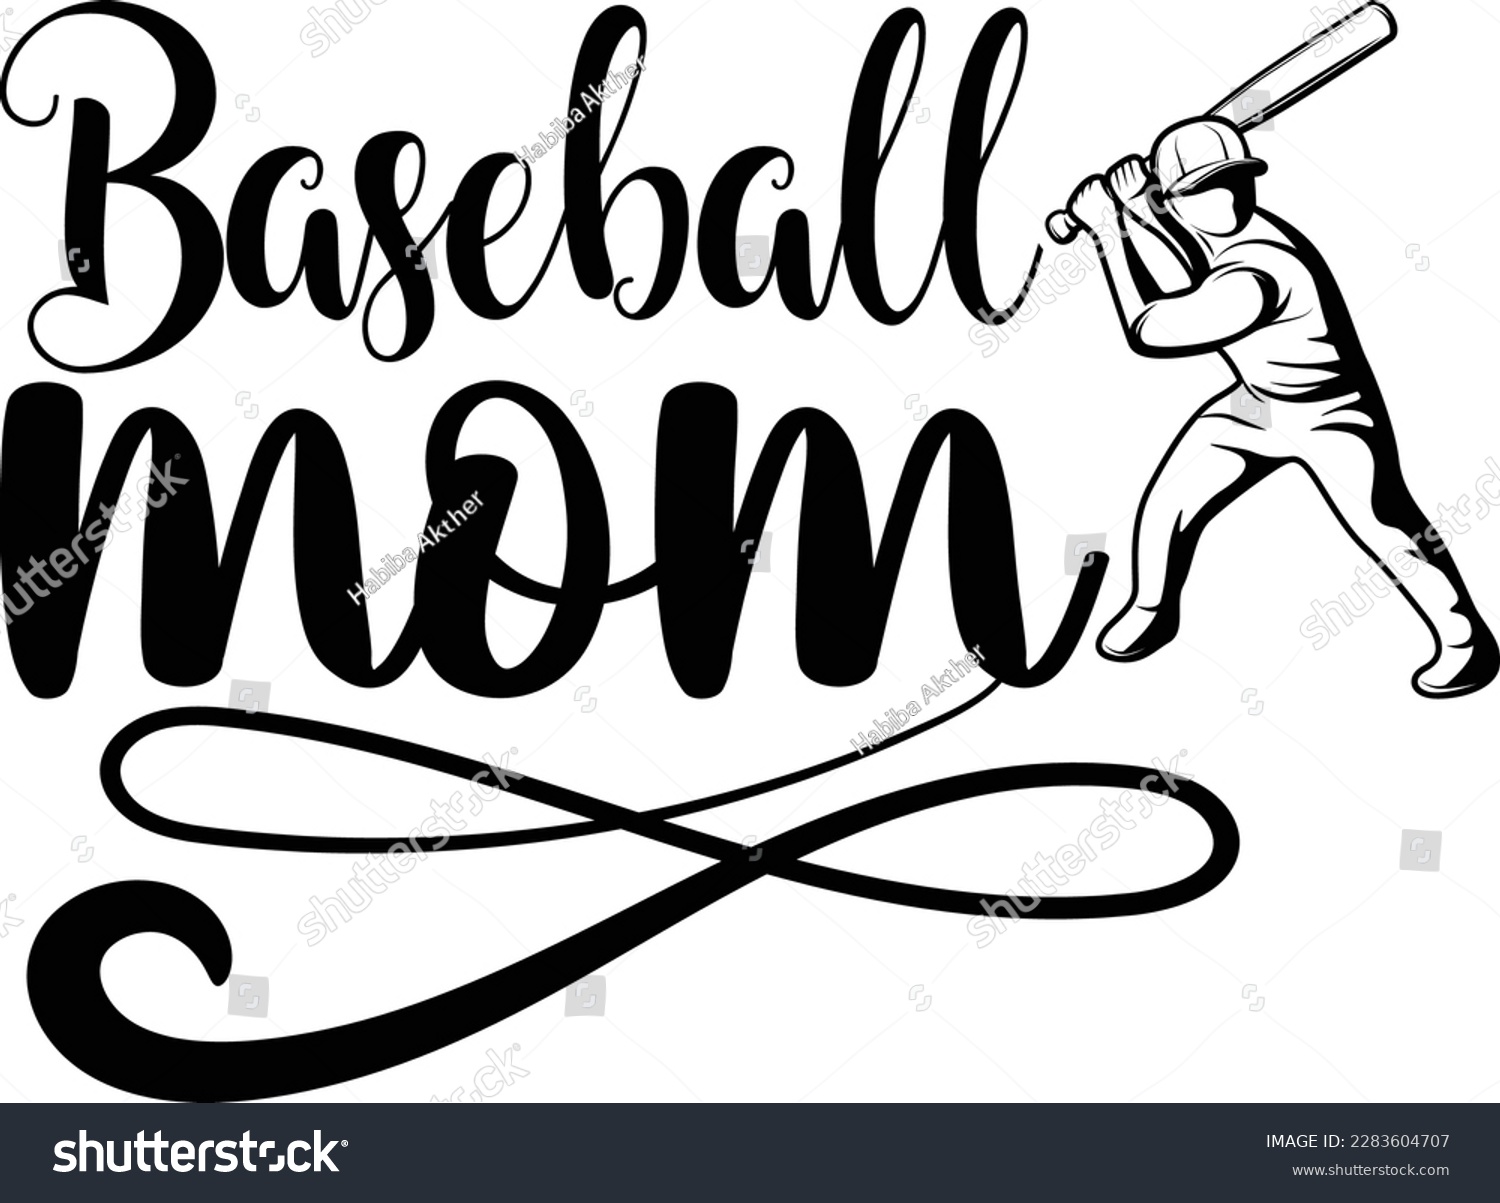 SVG of Baseball y'all svg ,Sports ,Mom Life ,Supportive Mom ,Silhouette, Team, Baseball Template 0027 svg ,eps, Softball , Game day , T-Shirt,  Baseball Stitches ,Vector ,Baseball Threads,cutter,Mascot svg svg